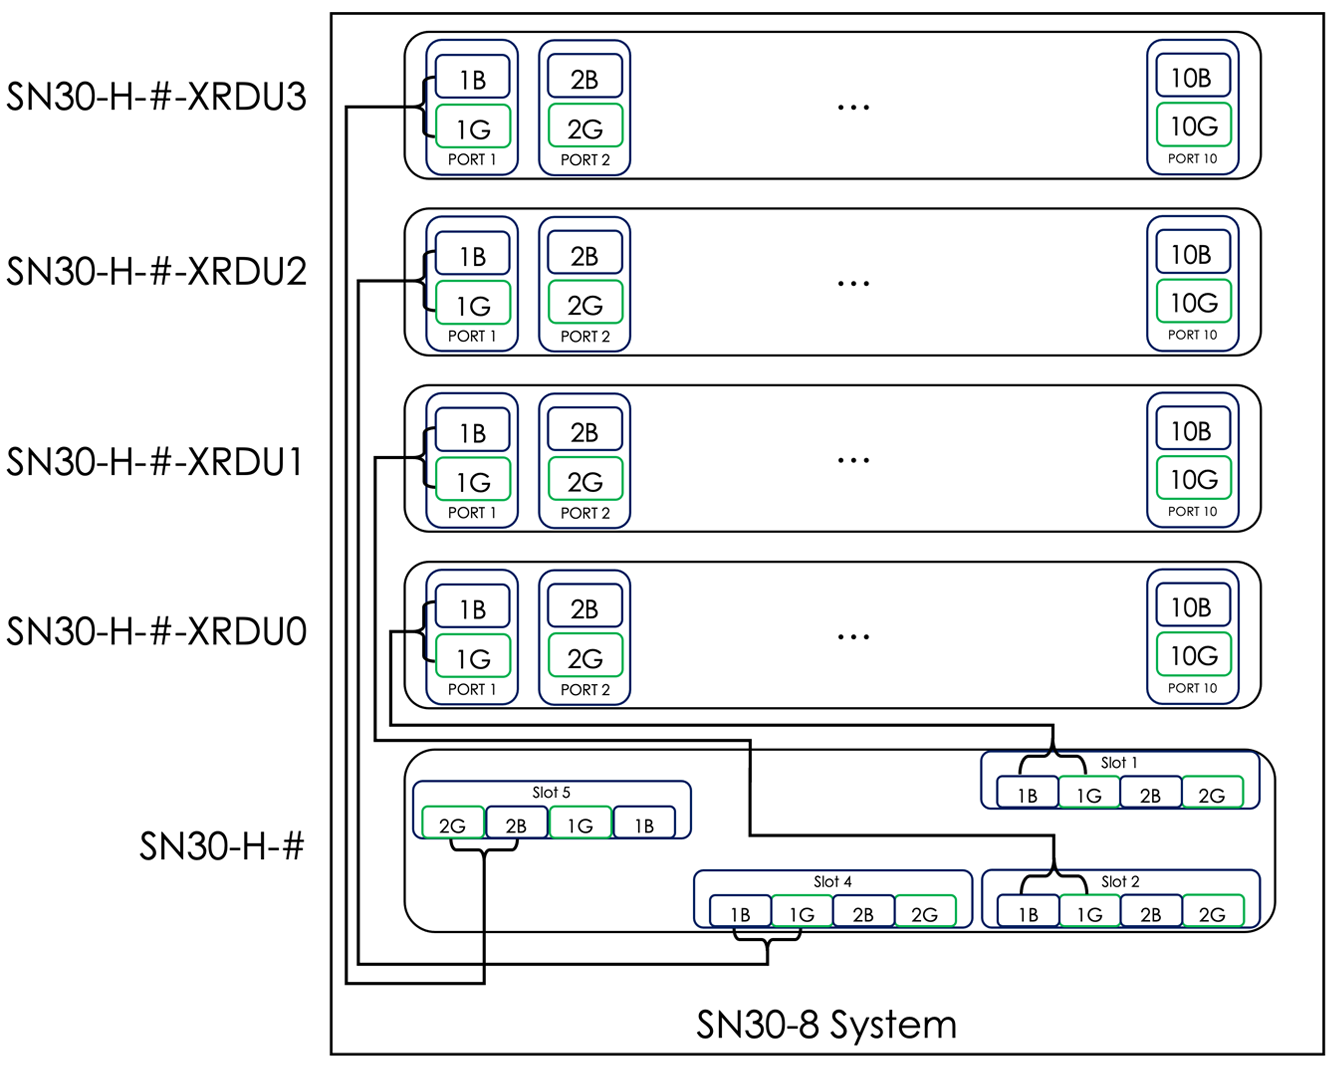 Topology of connections between the SN30-Hs to SN30-2s in a system